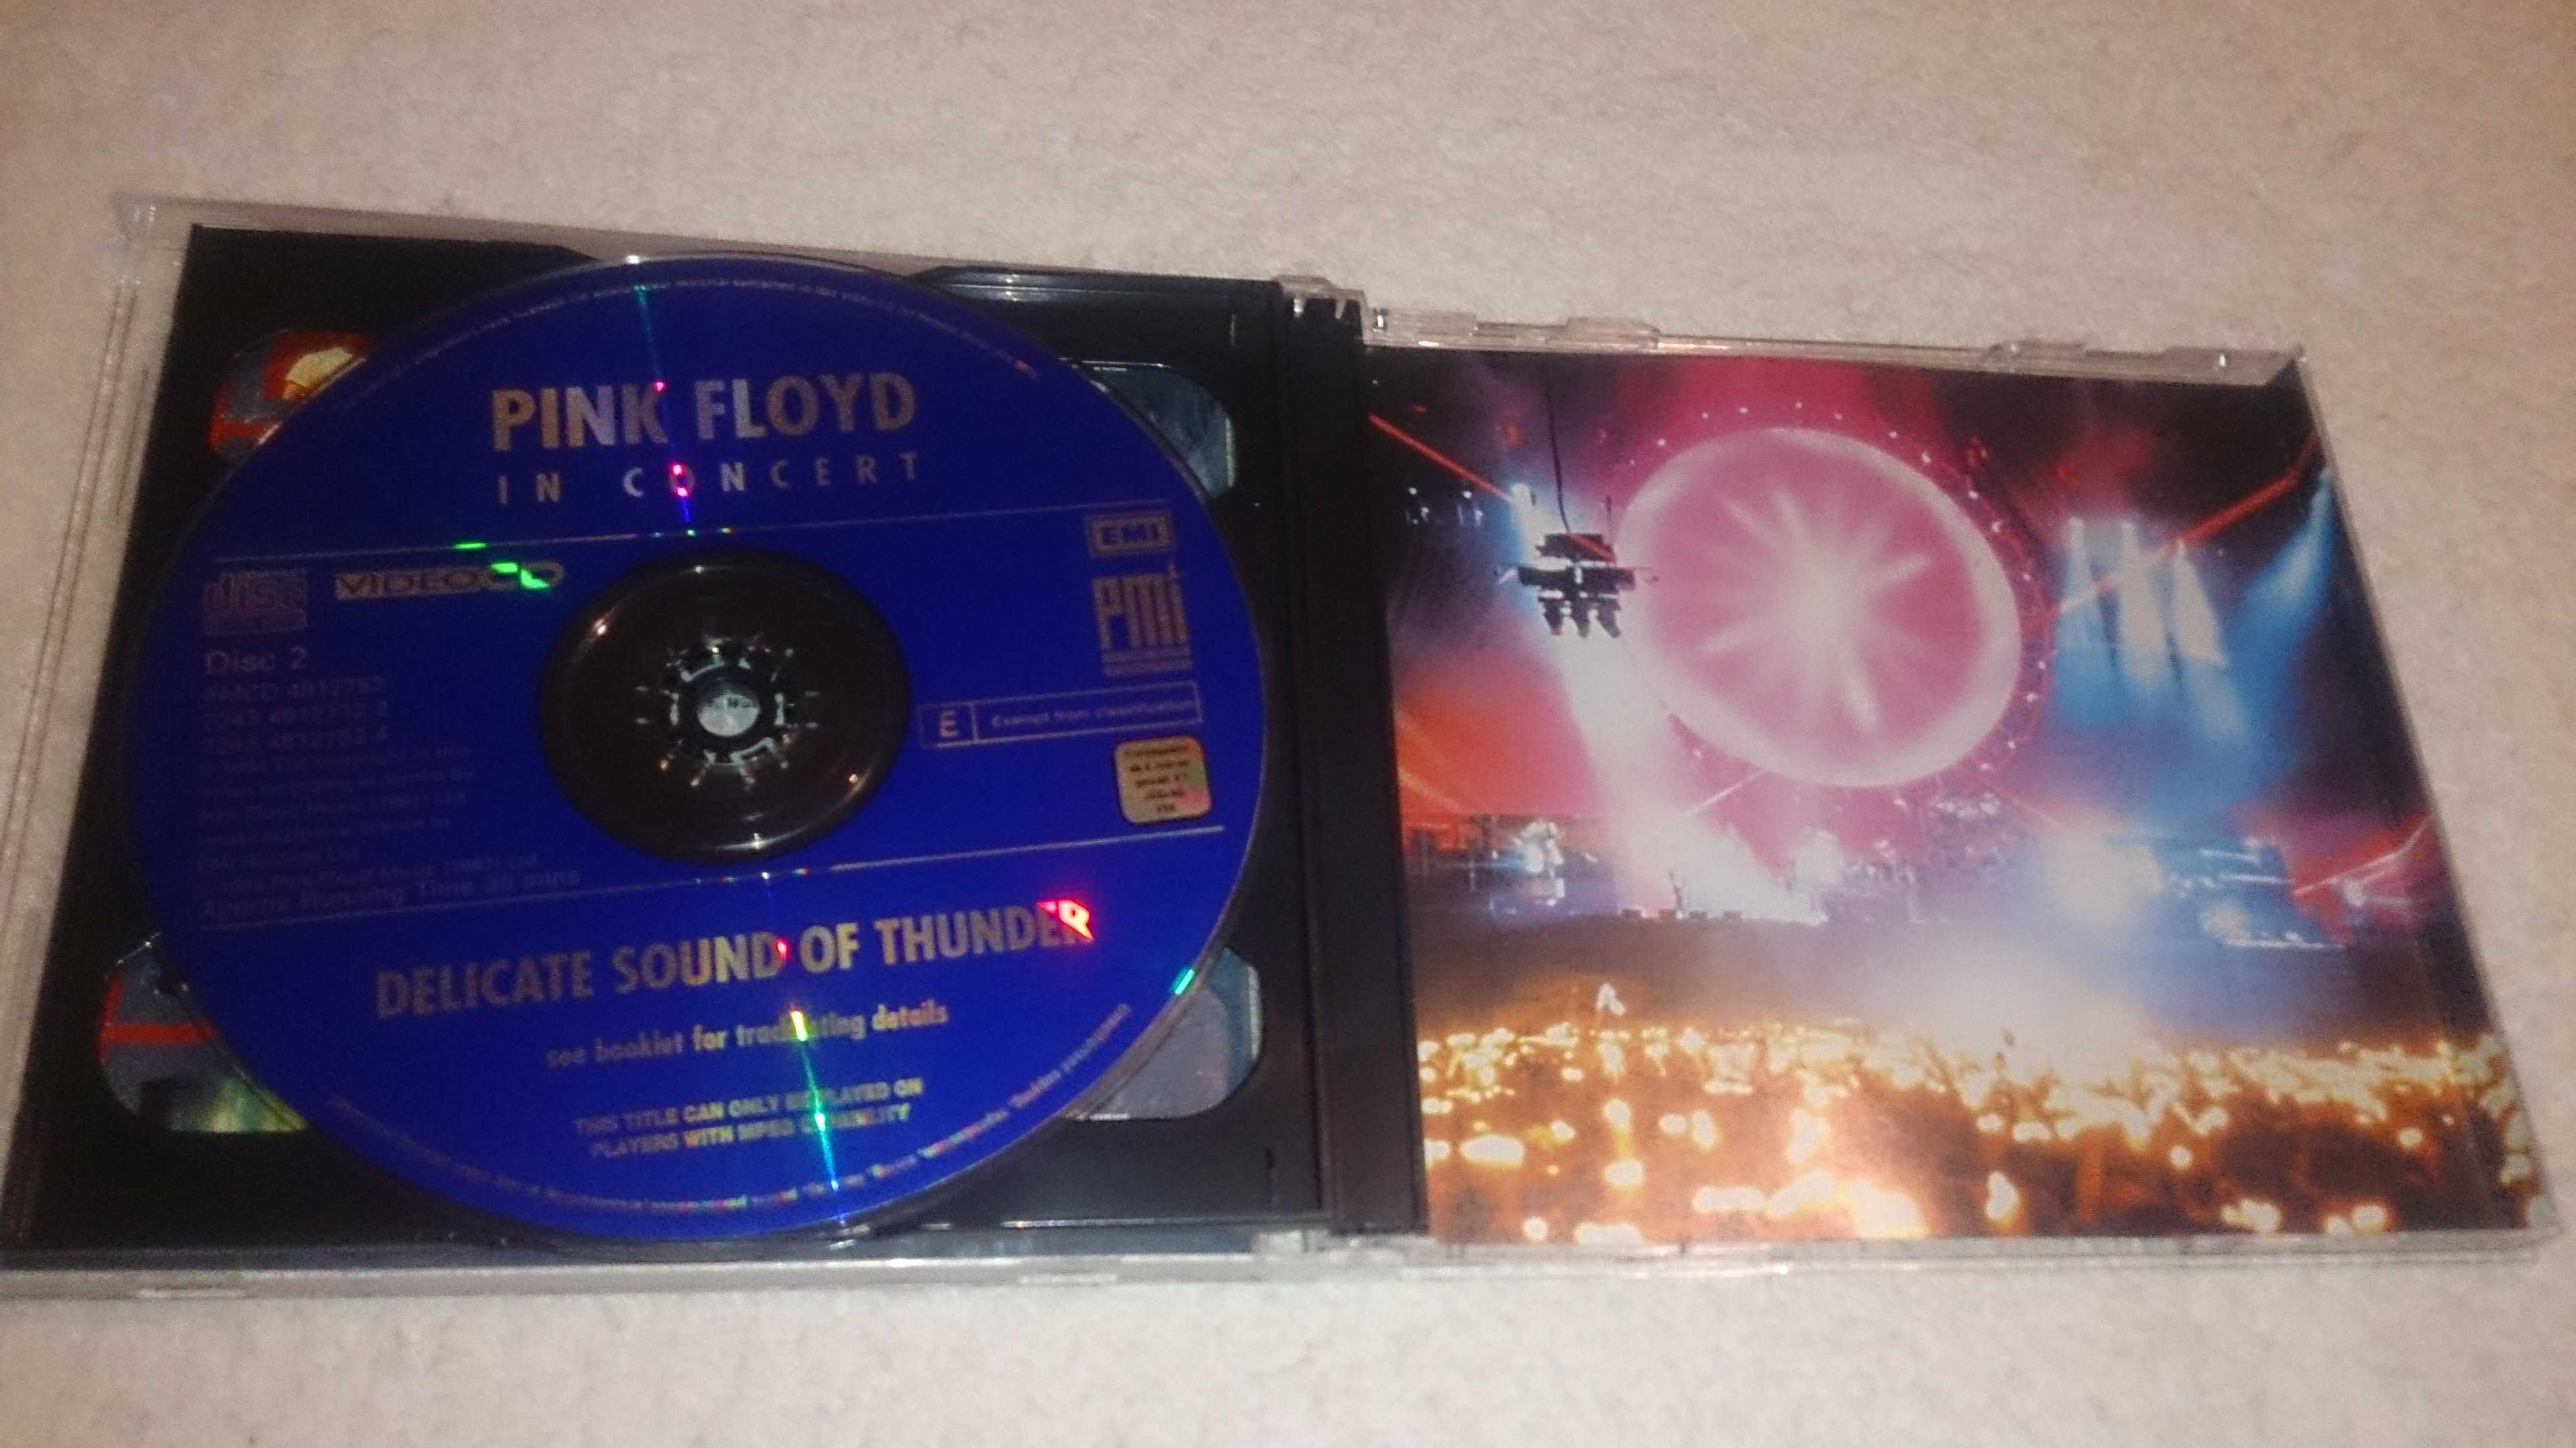 pink floyd: in concert - delicate sound of thunder (video cd duplo)